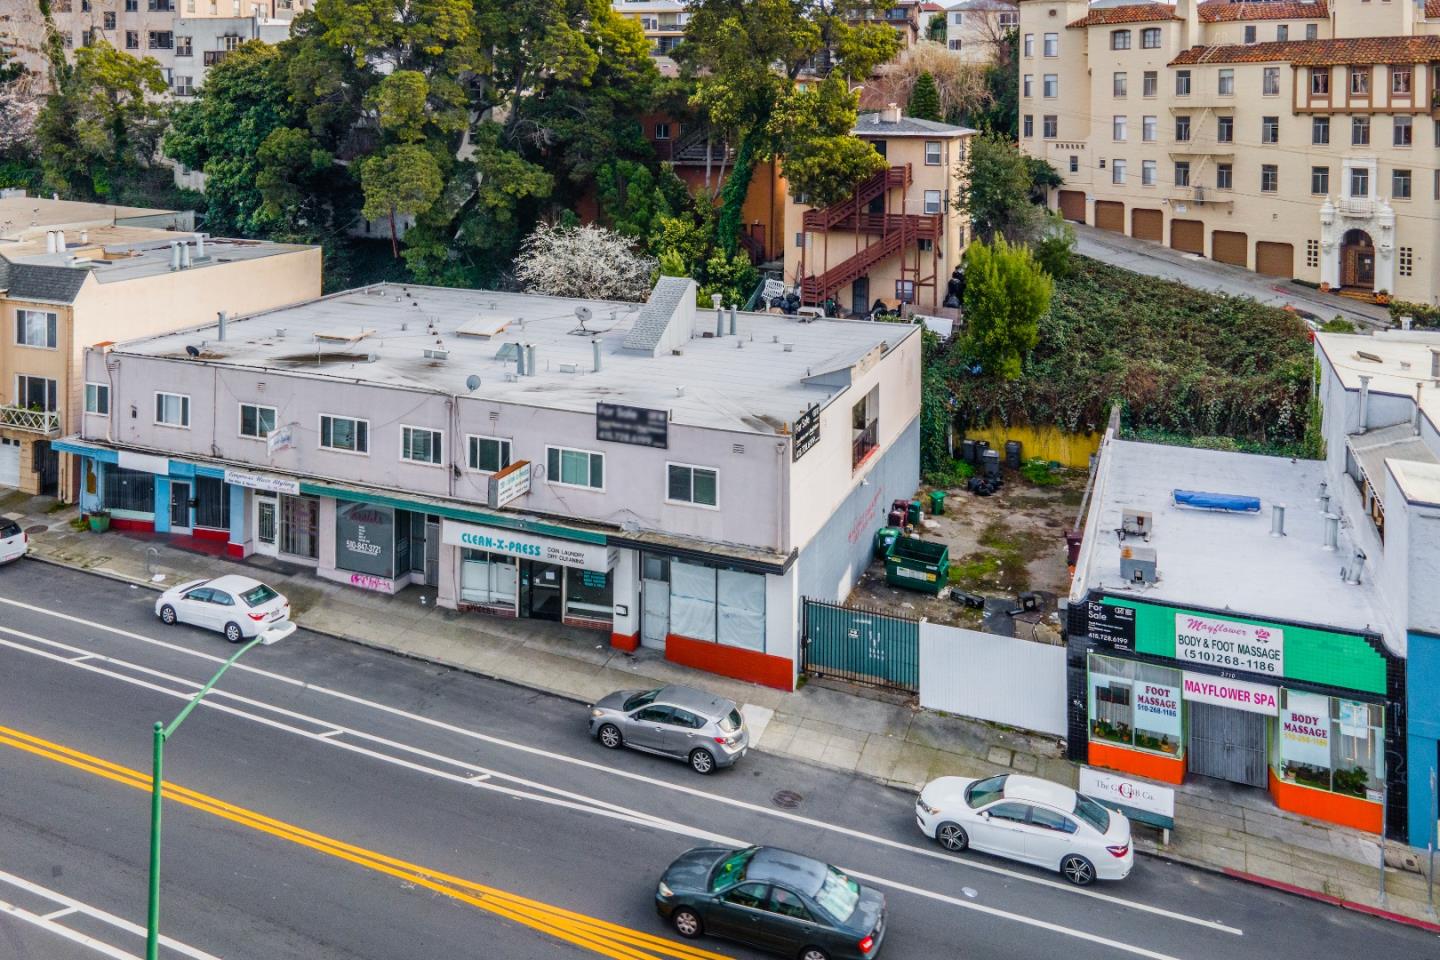 Seize this rare mostly vacant opportunity for an exceptional investment. Instant income generation w/an excellent Retail Building currently leased to Mayflower Spa; has options for extending or for an owner-user space w/ great signage visibility; an ideal addition to your portfolio at a 6.25% - 8% cap or better. A Multi-Faceted multi-use building w/5 spacious commercial units (5 vacant) & 6 well-appointed 1BD/1BA residential apartments, in a desirable rental market (3 vacant); commercial spaces offer income potential for a variety of businesses; total interior is ~9,700 SF, ensuring ample room. The adjacent vacant land lot is poised to deliver substantial returns at ~ 3,000 SF; it's a fantastic opportunity for development or expansion, adding value; previously used as parking for adjacent commercial buildings. The property benefits from flexible zoning regulations, opening up multiple investment avenues. Abundant Space: ~12,700 SF Total Lot, and Per Appraiser Total Building ~12,868 SF.